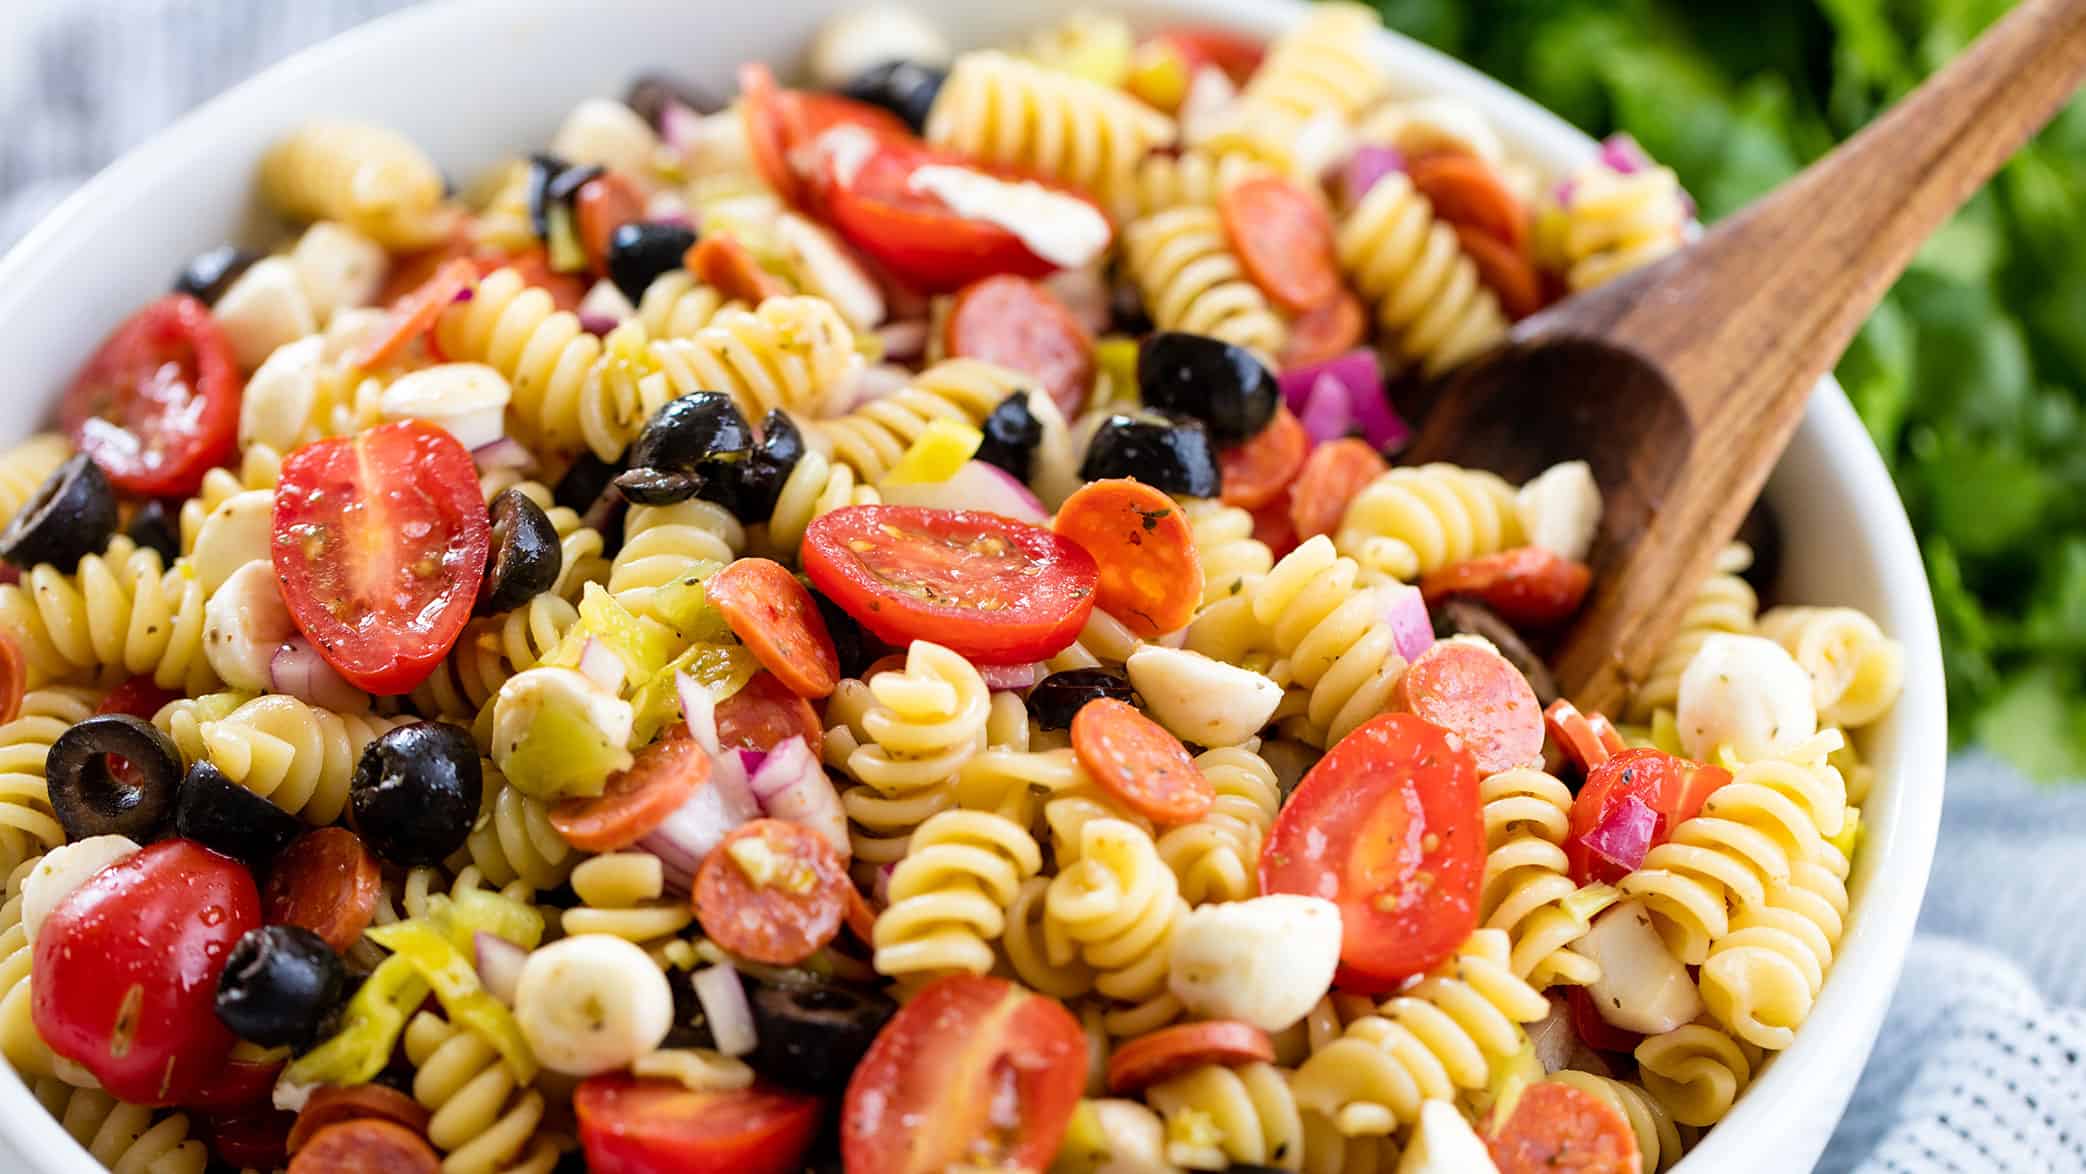 Pasta salad in a bowl